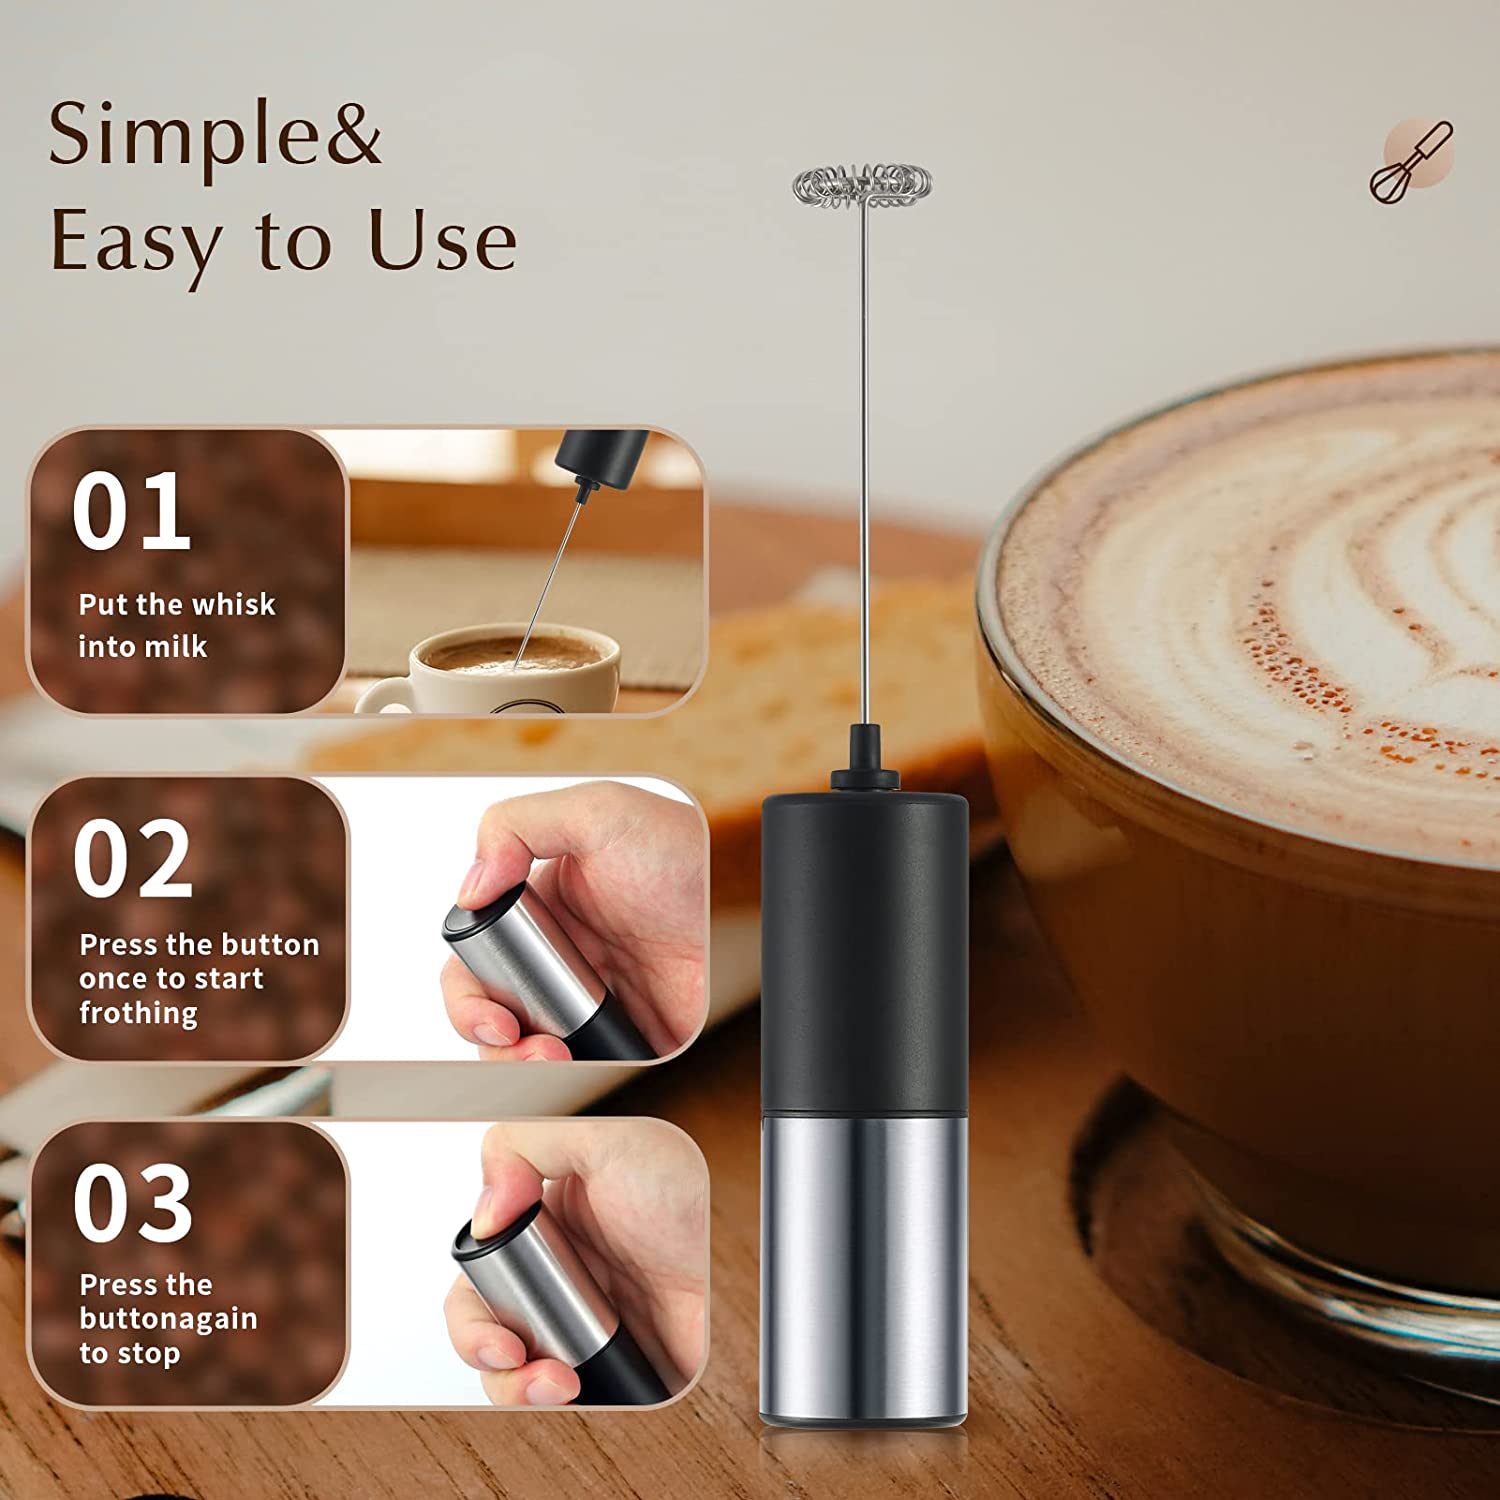 Milk Frother Handheld for Coffee, Electric Whisk Drink Mixer for Lattes, Milk Foamer, Mini Blender Foam Maker for Lattes, Cappuccino, Hot Chocolate